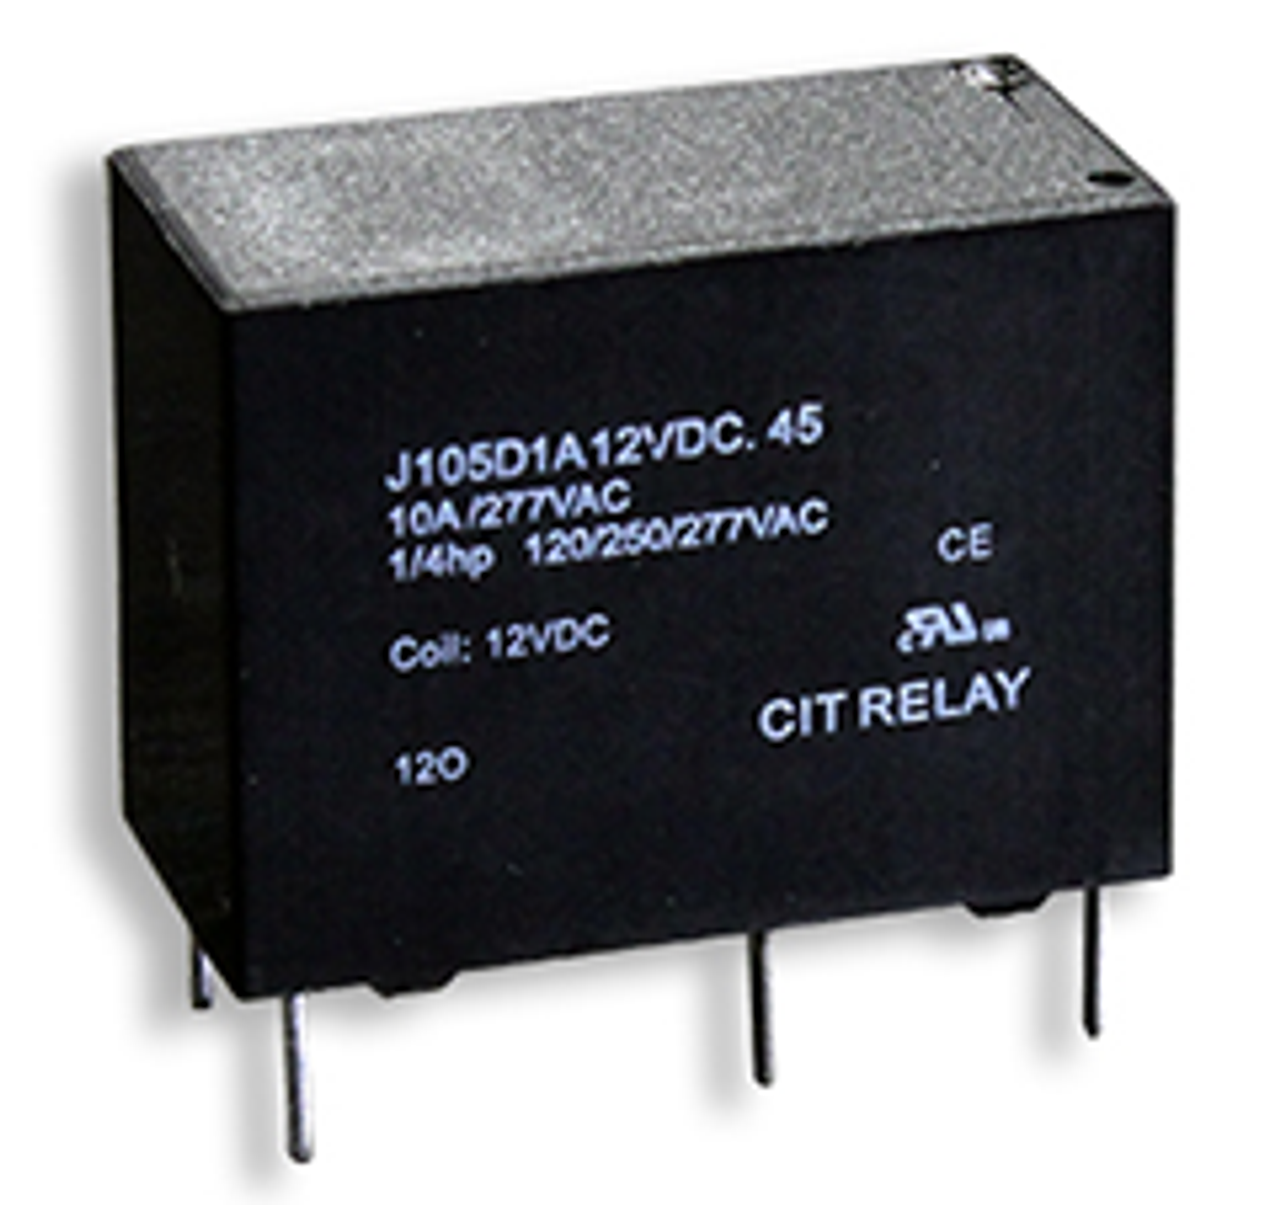 CIT Relay and Switch J105D1AS6VDC.45 Power Relays